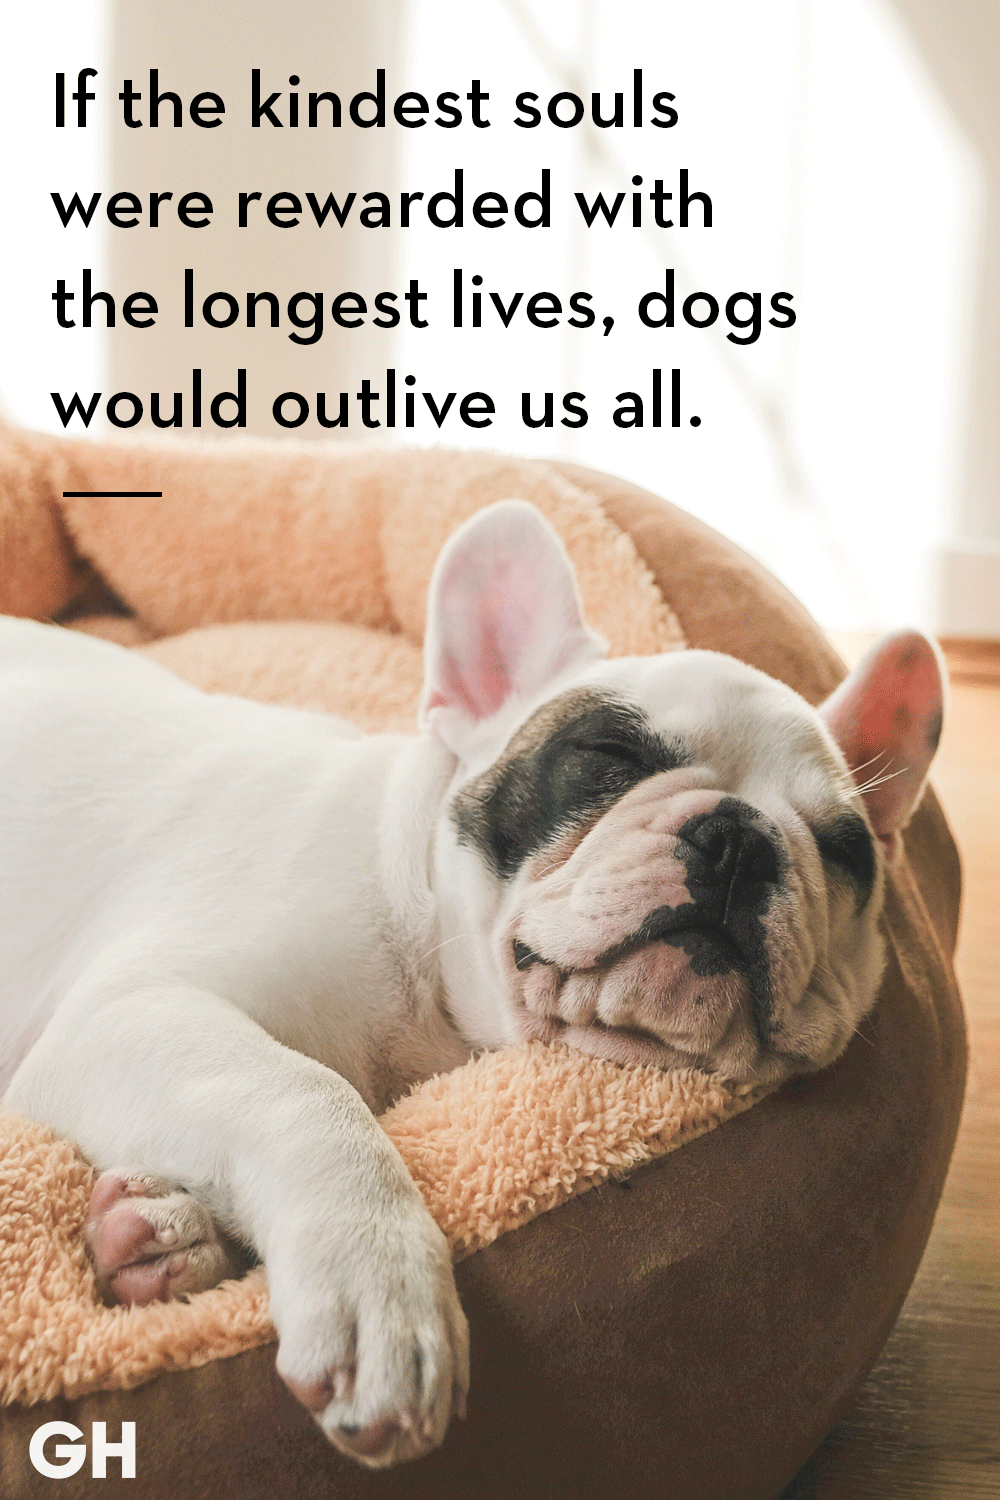 how long have dogs lived with humans